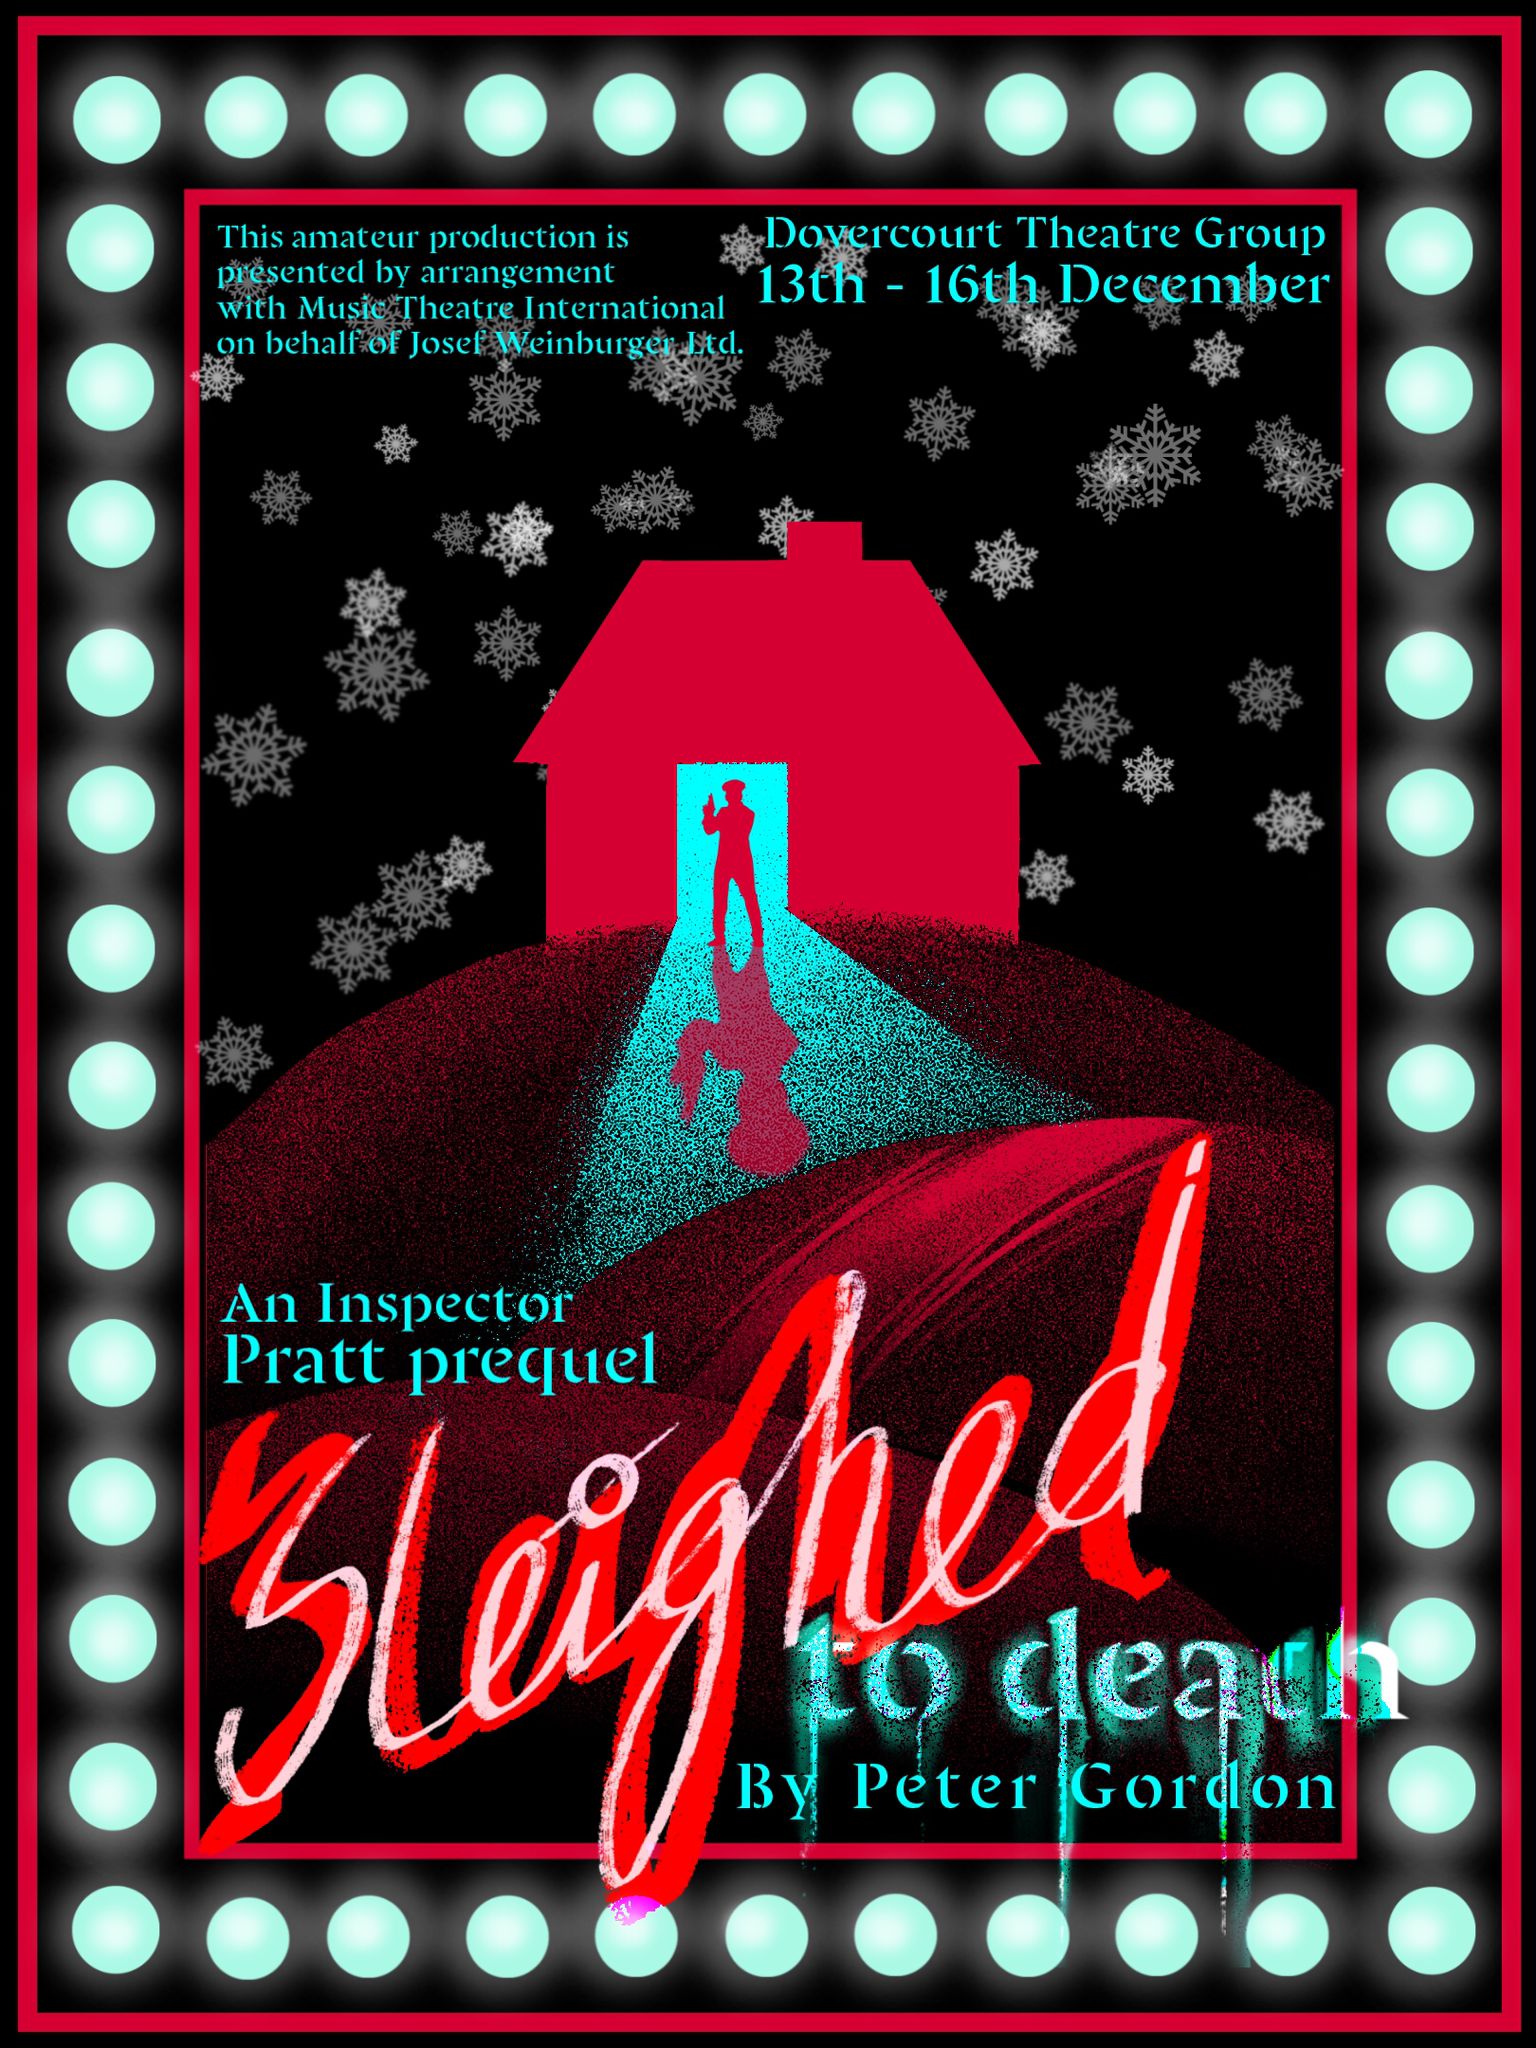 A dark landscape with snow falling.  A house on a hill with its door open, showing the silhouette of a figure holding a gun.  Text: Sleighed To Death by Peter Gordon.  An Inspector Pratt prequel.  This amateur production is presented by arrangement with Music Theatre International on behalf of Josef Weinberger.  Dovercourt Theatre Group 13th - 16th December.